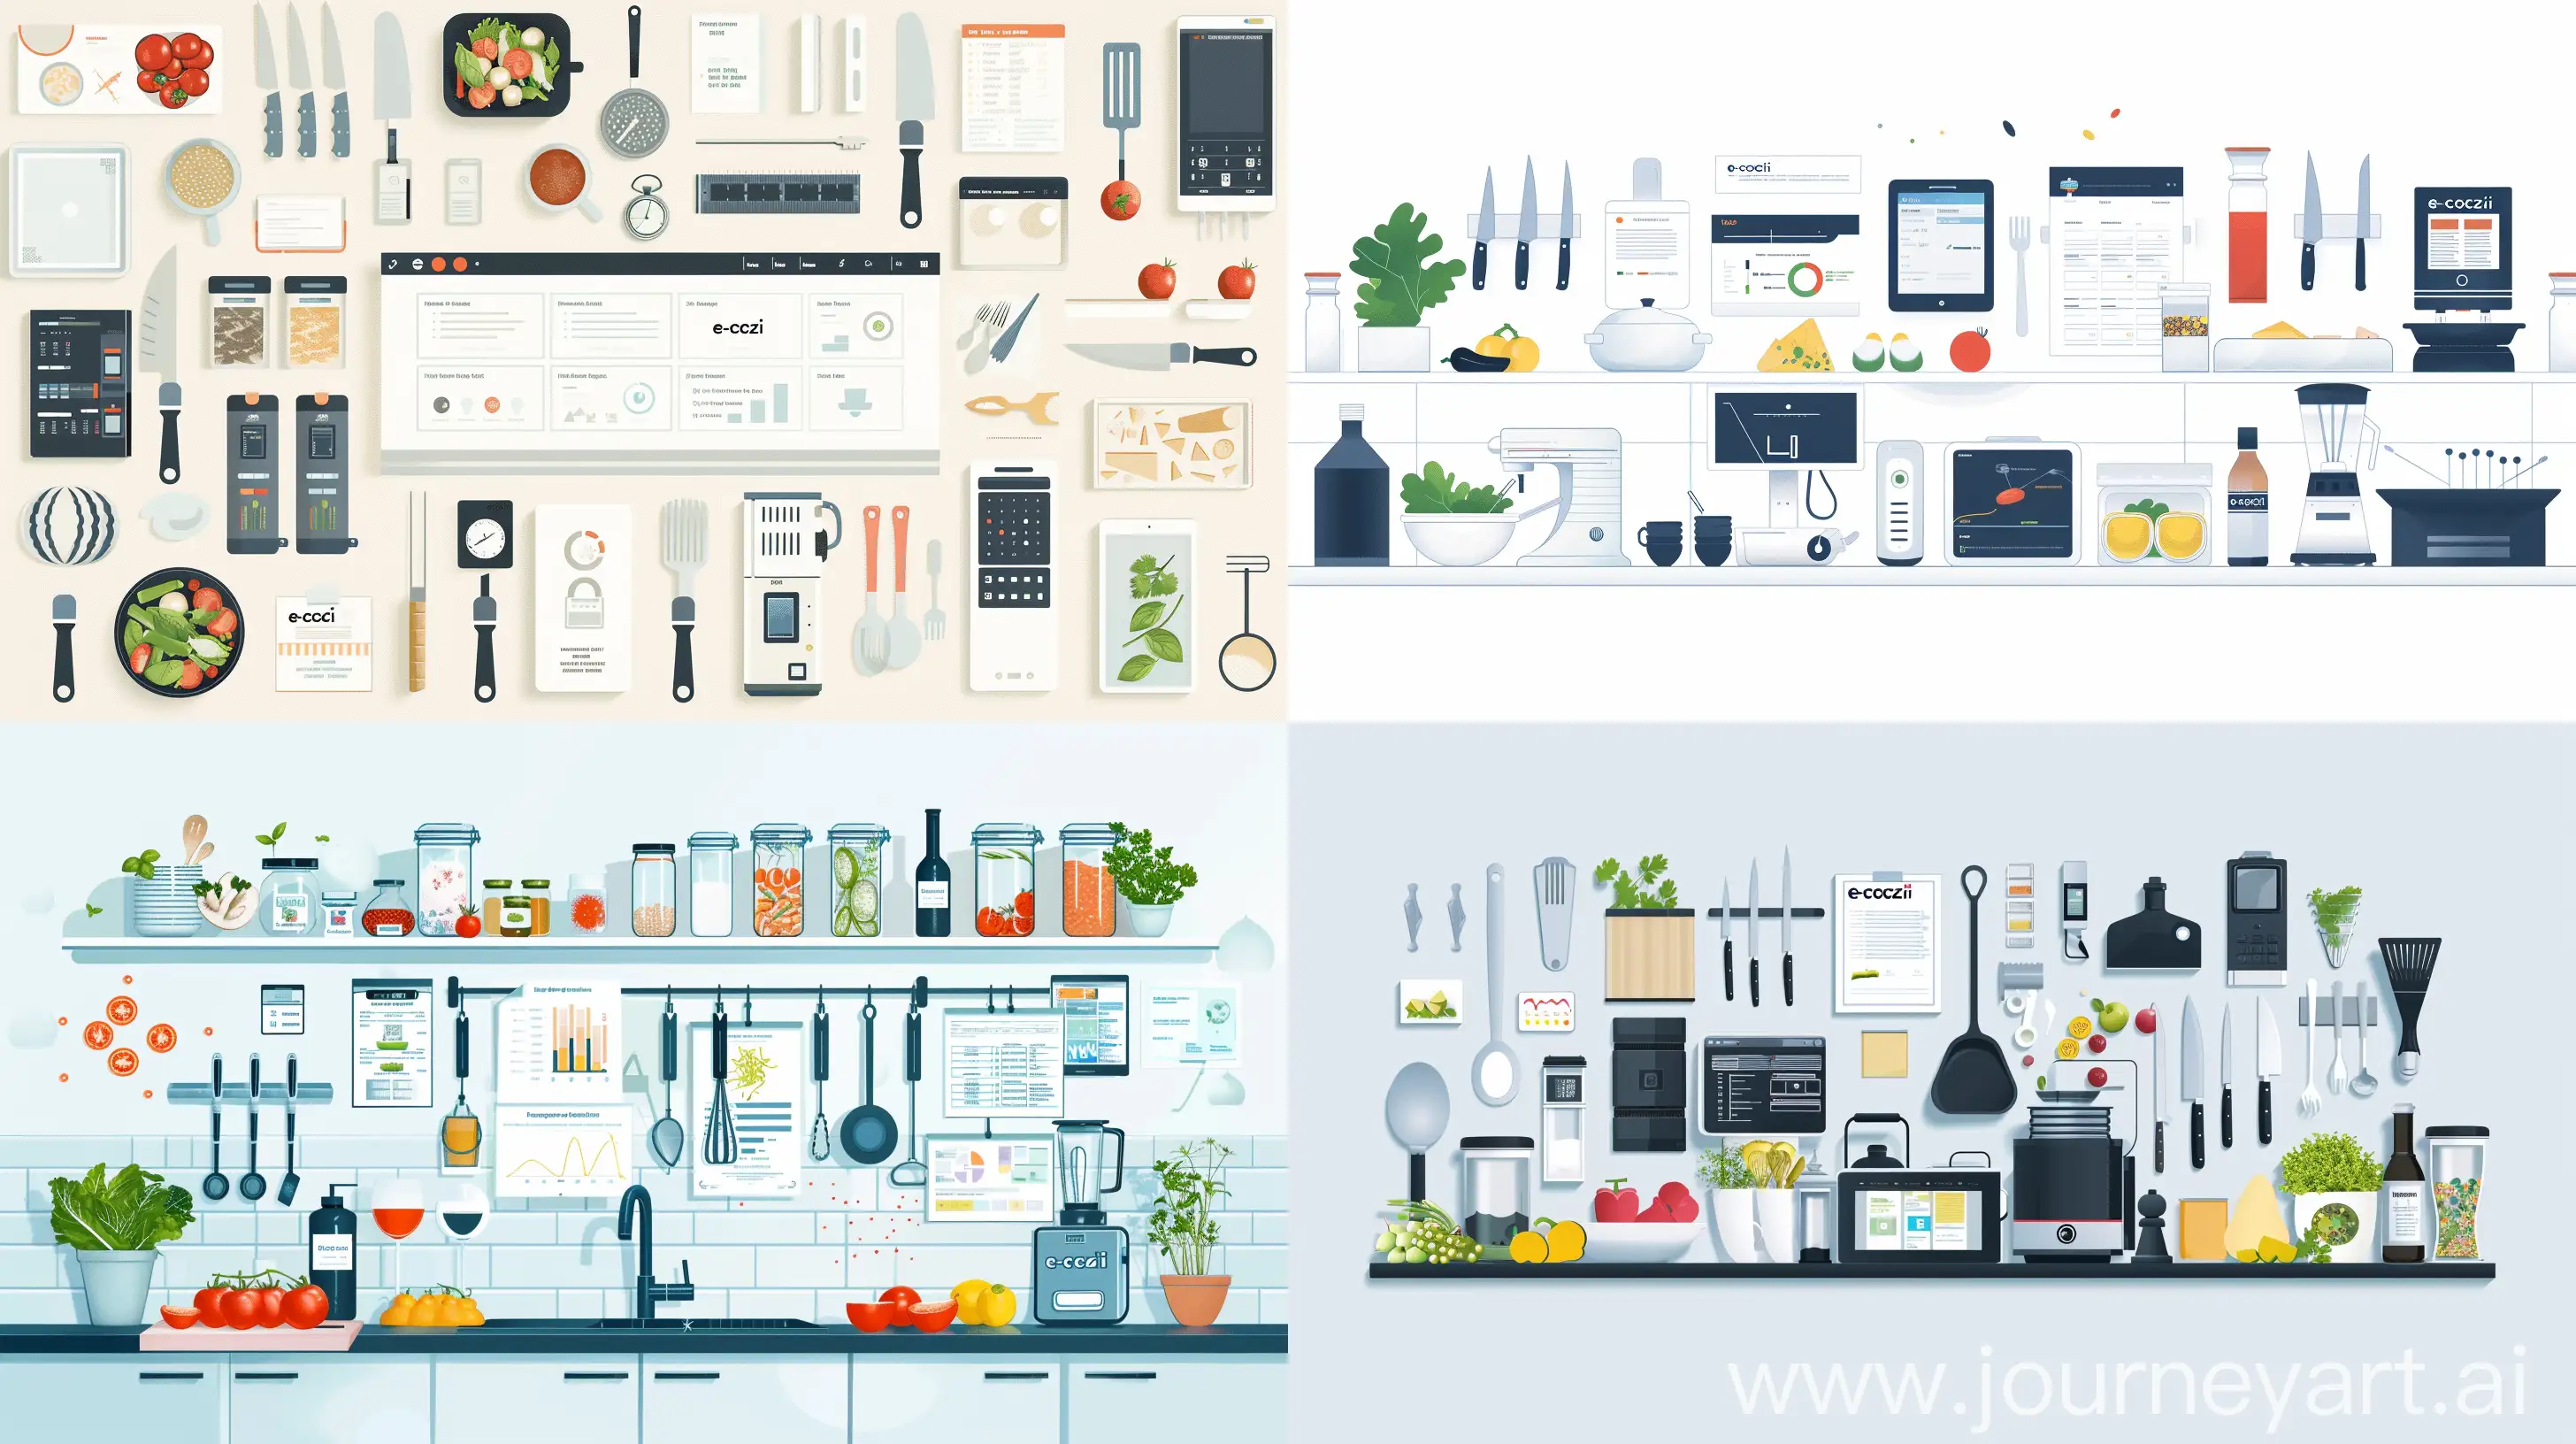 create a visually appealing image for the presentation of the e-cozi system, a SAAS platform for industrial kitchen management. The image should highlight the system's key features and benefits, conveying professionalism, efficiency, and innovation. Incorporate elements related to cooking and business management, such as kitchen utensils, report graphics, fresh ingredients, and electronic devices, while maintaining a clean and professional aesthetic. Create an image that captures attention and portrays e-cozi as a modern and effective solution for industrial kitchen management. --ar 16:9